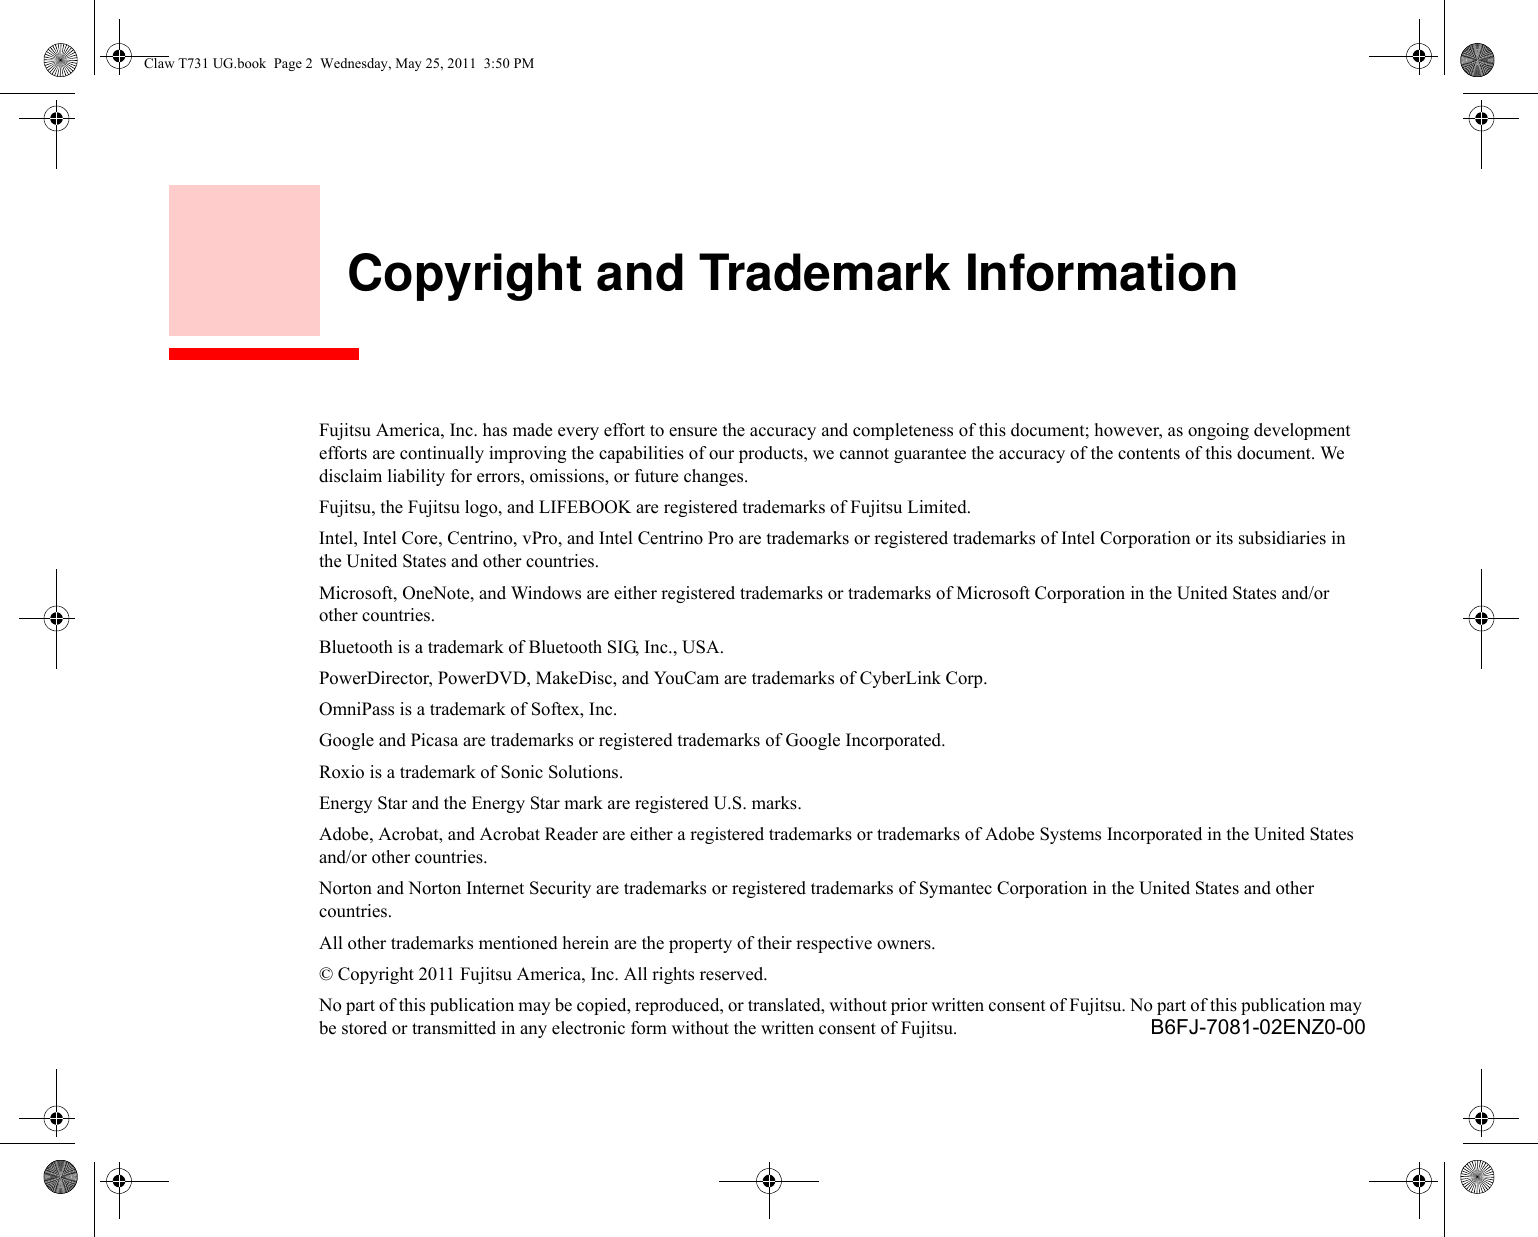     Copyright and Trademark InformationFujitsu America, Inc. has made every effort to ensure the accuracy and completeness of this document; however, as ongoing development efforts are continually improving the capabilities of our products, we cannot guarantee the accuracy of the contents of this document. We disclaim liability for errors, omissions, or future changes.Fujitsu, the Fujitsu logo, and LIFEBOOK are registered trademarks of Fujitsu Limited.Intel, Intel Core, Centrino, vPro, and Intel Centrino Pro are trademarks or registered trademarks of Intel Corporation or its subsidiaries in the United States and other countries.Microsoft, OneNote, and Windows are either registered trademarks or trademarks of Microsoft Corporation in the United States and/or other countries.Bluetooth is a trademark of Bluetooth SIG, Inc., USA.PowerDirector, PowerDVD, MakeDisc, and YouCam are trademarks of CyberLink Corp.OmniPass is a trademark of Softex, Inc.Google and Picasa are trademarks or registered trademarks of Google Incorporated.Roxio is a trademark of Sonic Solutions.Energy Star and the Energy Star mark are registered U.S. marks.Adobe, Acrobat, and Acrobat Reader are either a registered trademarks or trademarks of Adobe Systems Incorporated in the United States and/or other countries.Norton and Norton Internet Security are trademarks or registered trademarks of Symantec Corporation in the United States and other countries.All other trademarks mentioned herein are the property of their respective owners.© Copyright 2011 Fujitsu America, Inc. All rights reserved. No part of this publication may be copied, reproduced, or translated, without prior written consent of Fujitsu. No part of this publication may be stored or transmitted in any electronic form without the written consent of Fujitsu.  B6FJ-7081-02ENZ0-00Claw T731 UG.book  Page 2  Wednesday, May 25, 2011  3:50 PM